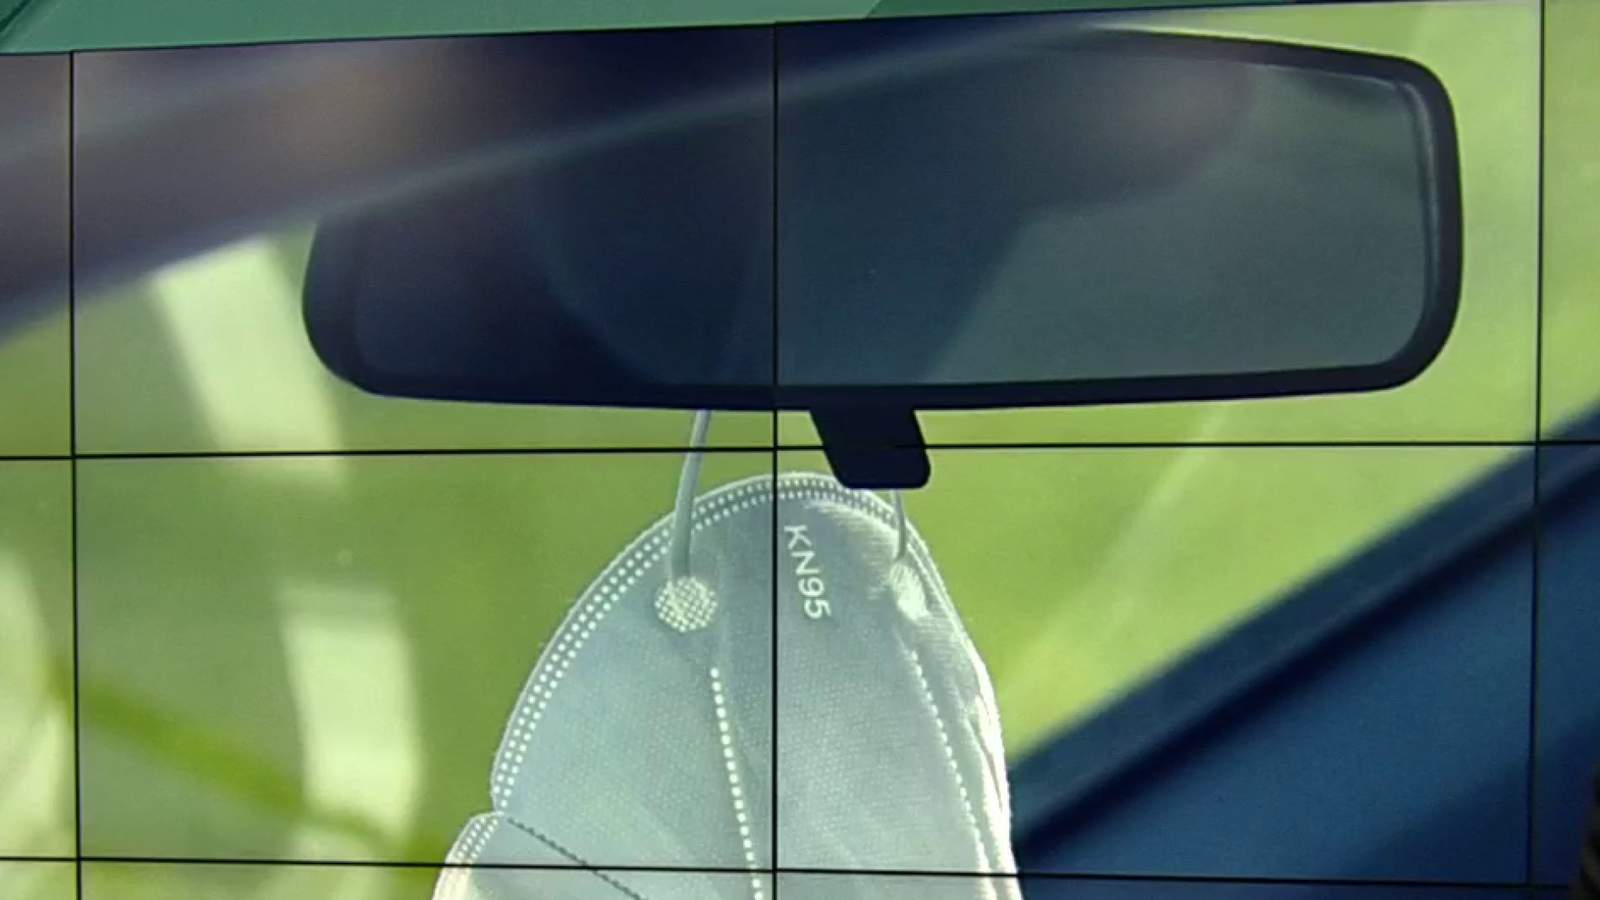 Hanging a face mask from your rear view mirror is dumb. Trooper Steve explains why